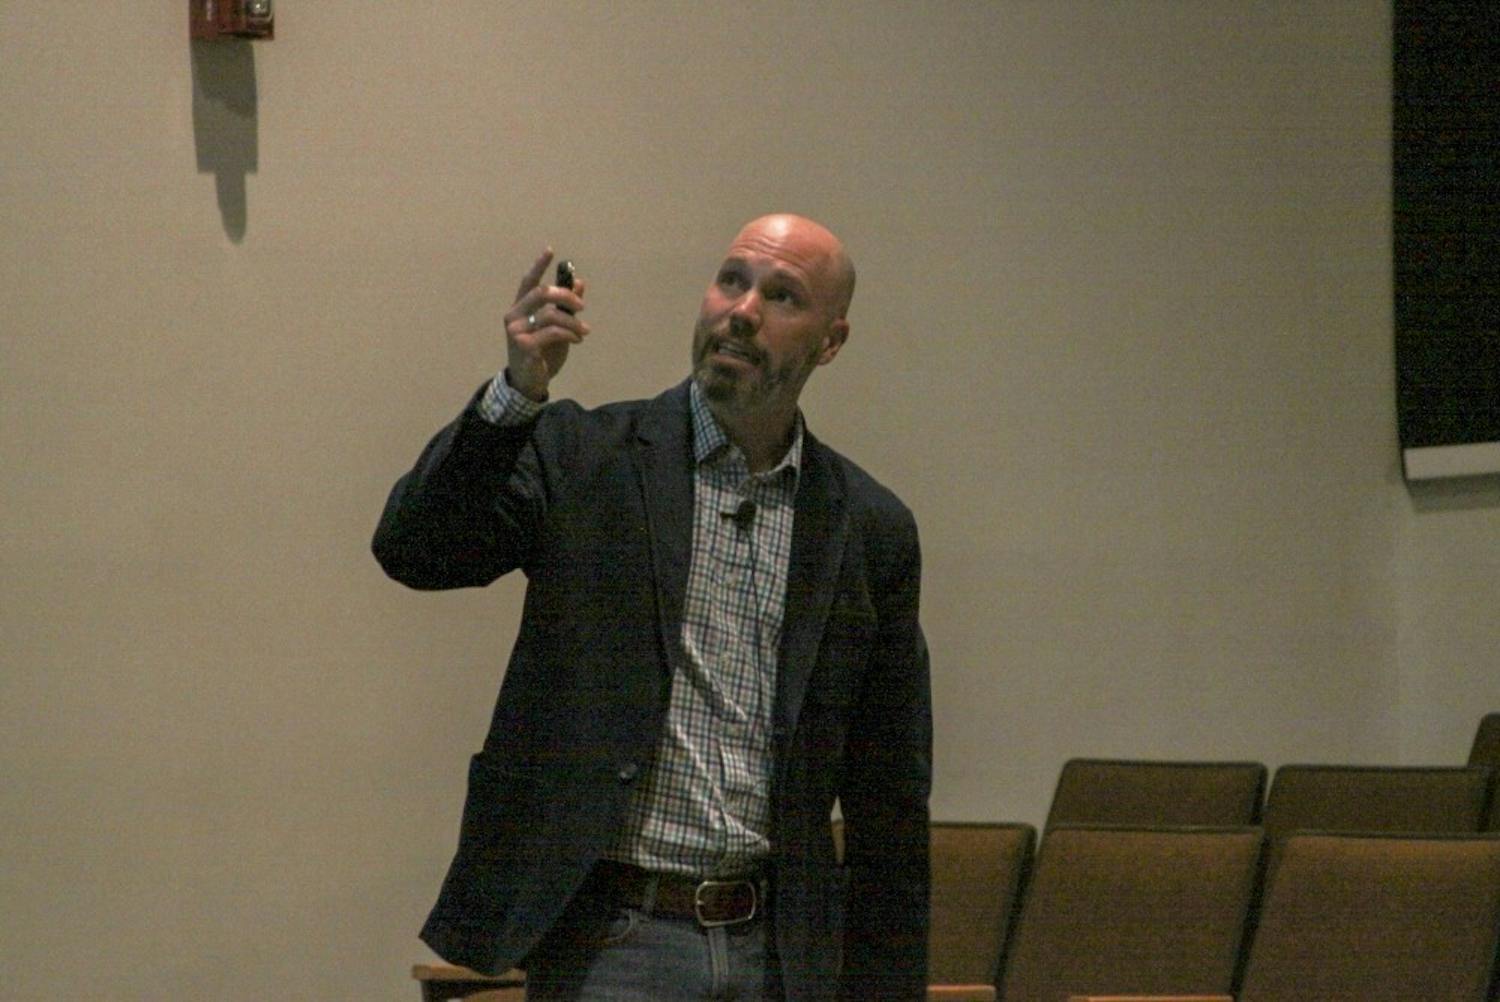 UNC-Chapel Hill alumnus and current associate professor of sociology at James Madison University Dr. Matt Ezzell gives a talk on consent, rape culture, and campus sexual assault for Sexual Assault Awareness Month on April 3 in the Student Union.